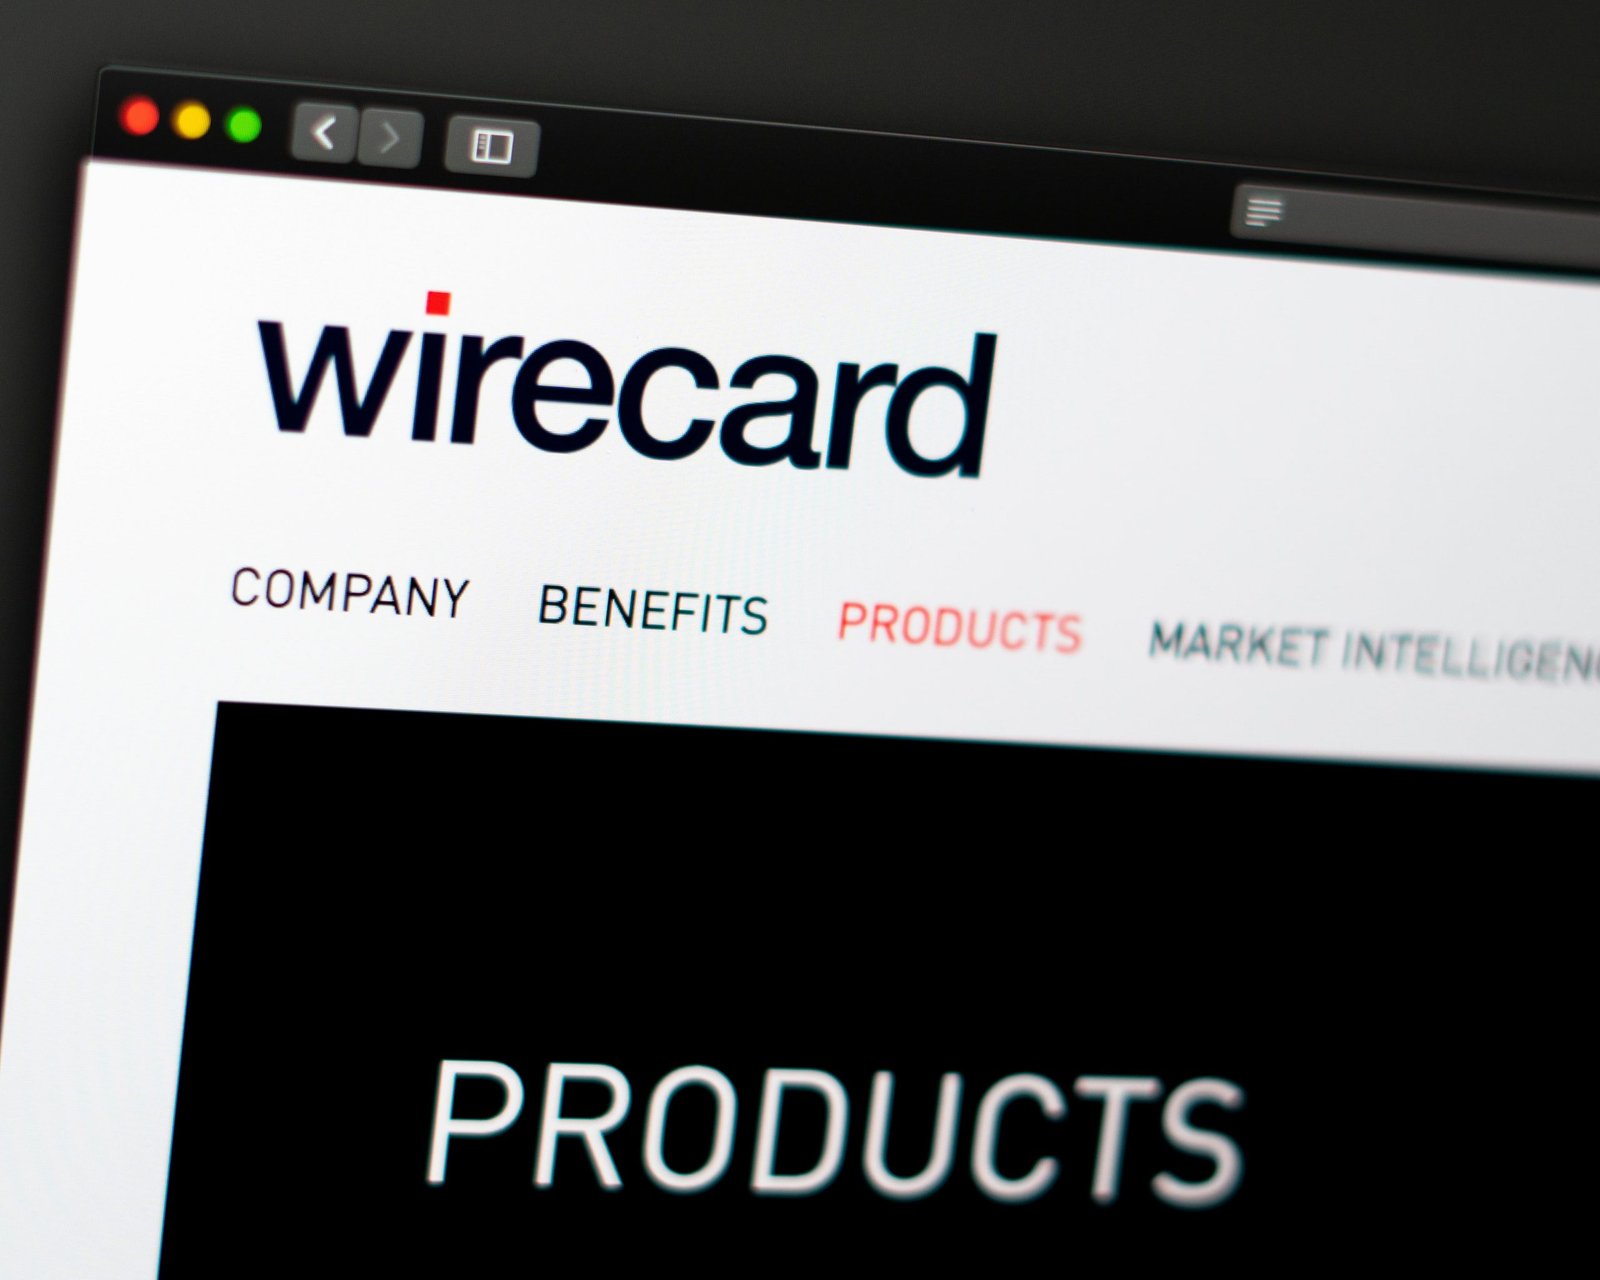 i-invest Online - Wirecard hits out at fraudsters-min